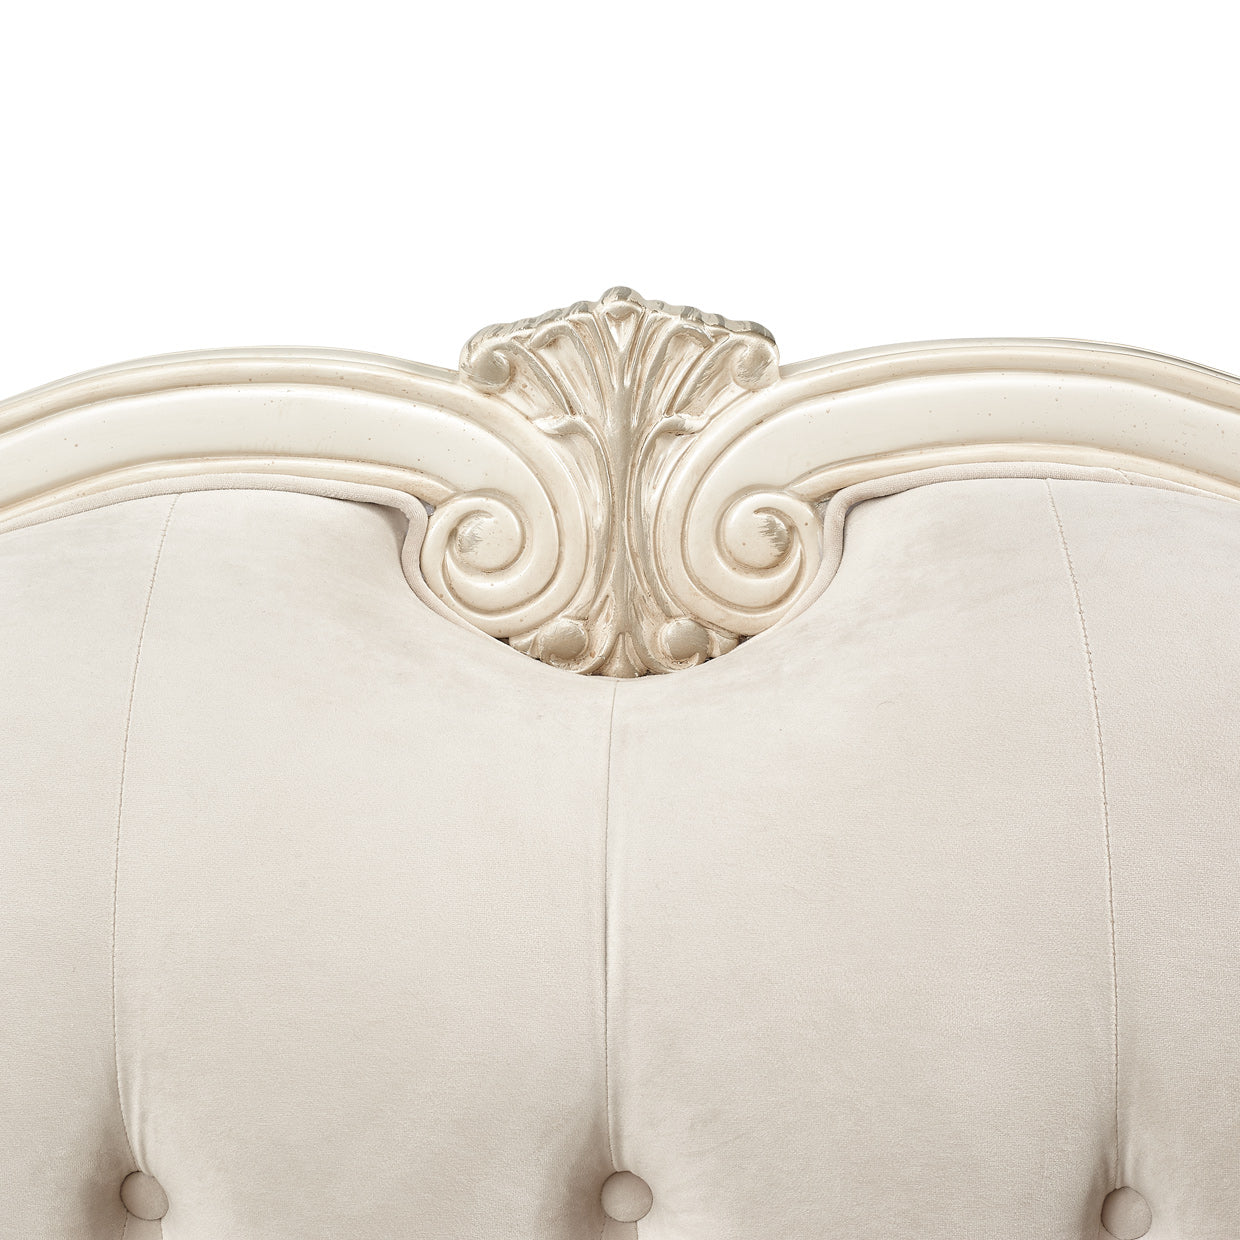 Lavelle-Classic Pearl, Sofa, French regal influence, scallop-shaped pieces, collection, classic French look, chic twist, hip, couture feel, upholstered pieces, Lavelle collection, class, style, Beveled inlaid glass, plush upholstery, generous storage, display spaces, antique hardware, genuine Swarovski crystal accents, design, detail, Upholstered, dream art, michael amini